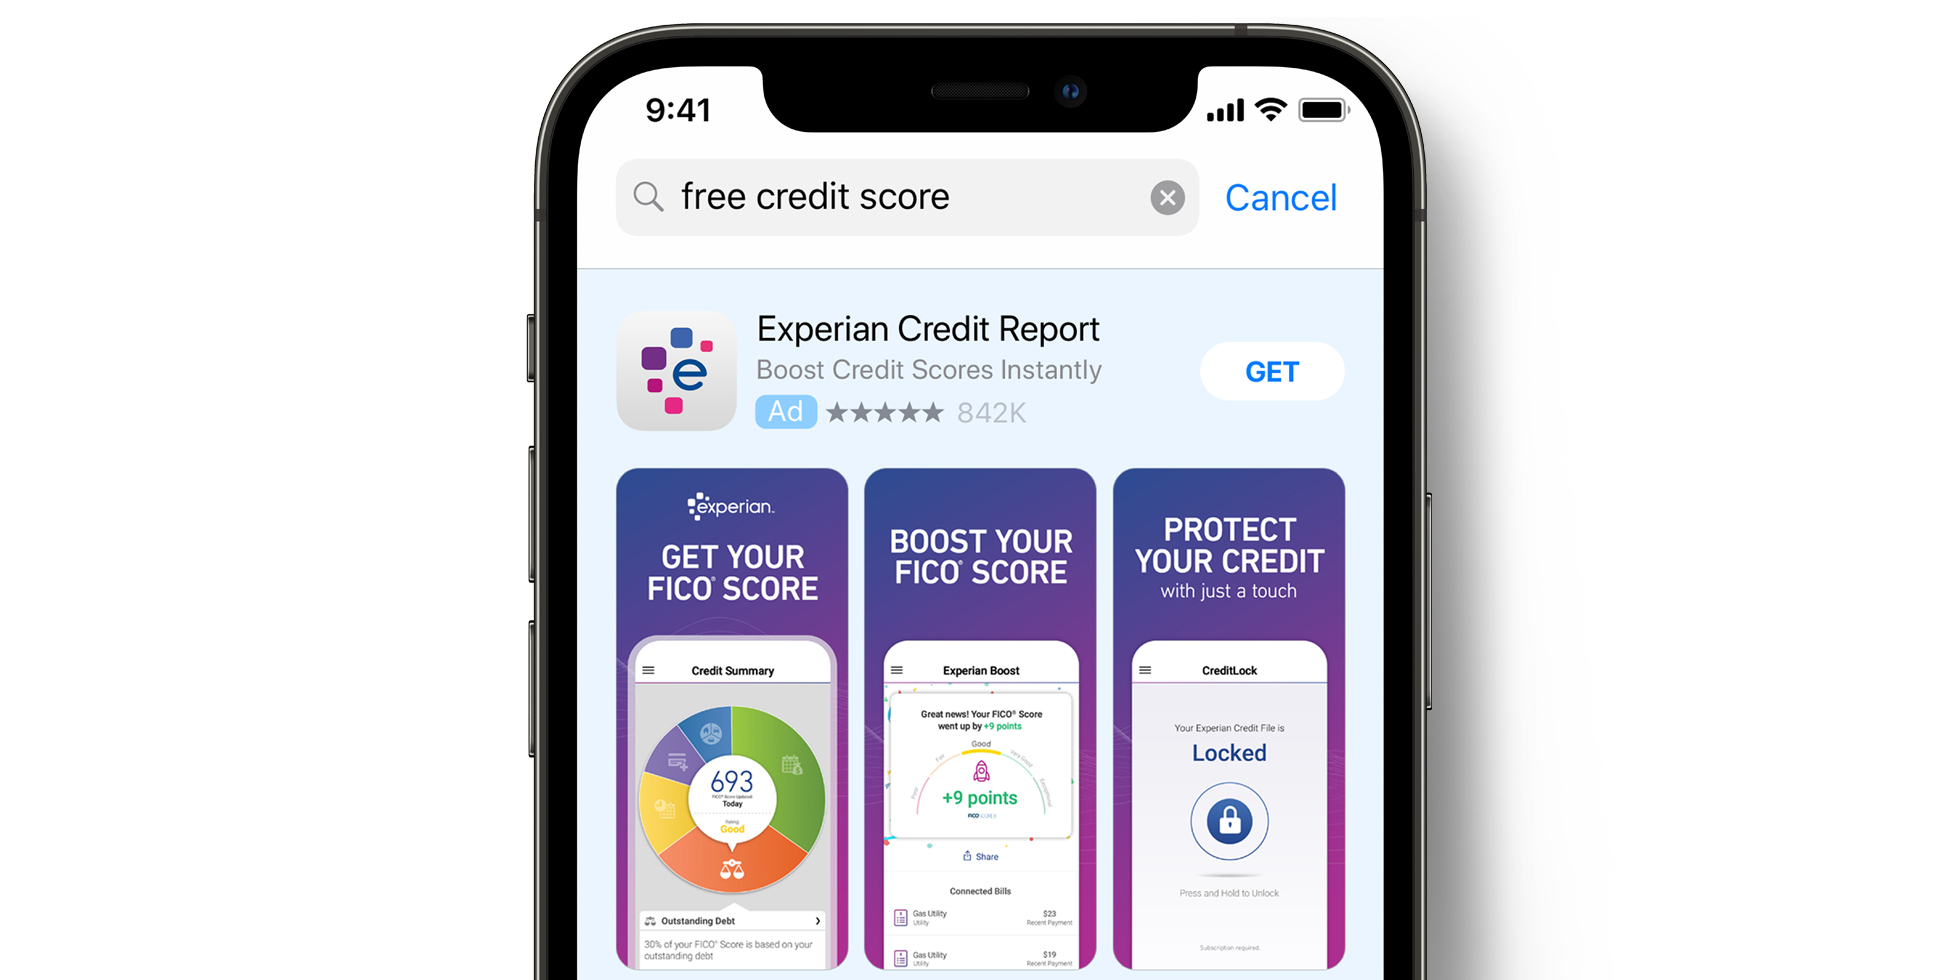 Experian ad on the App Store 